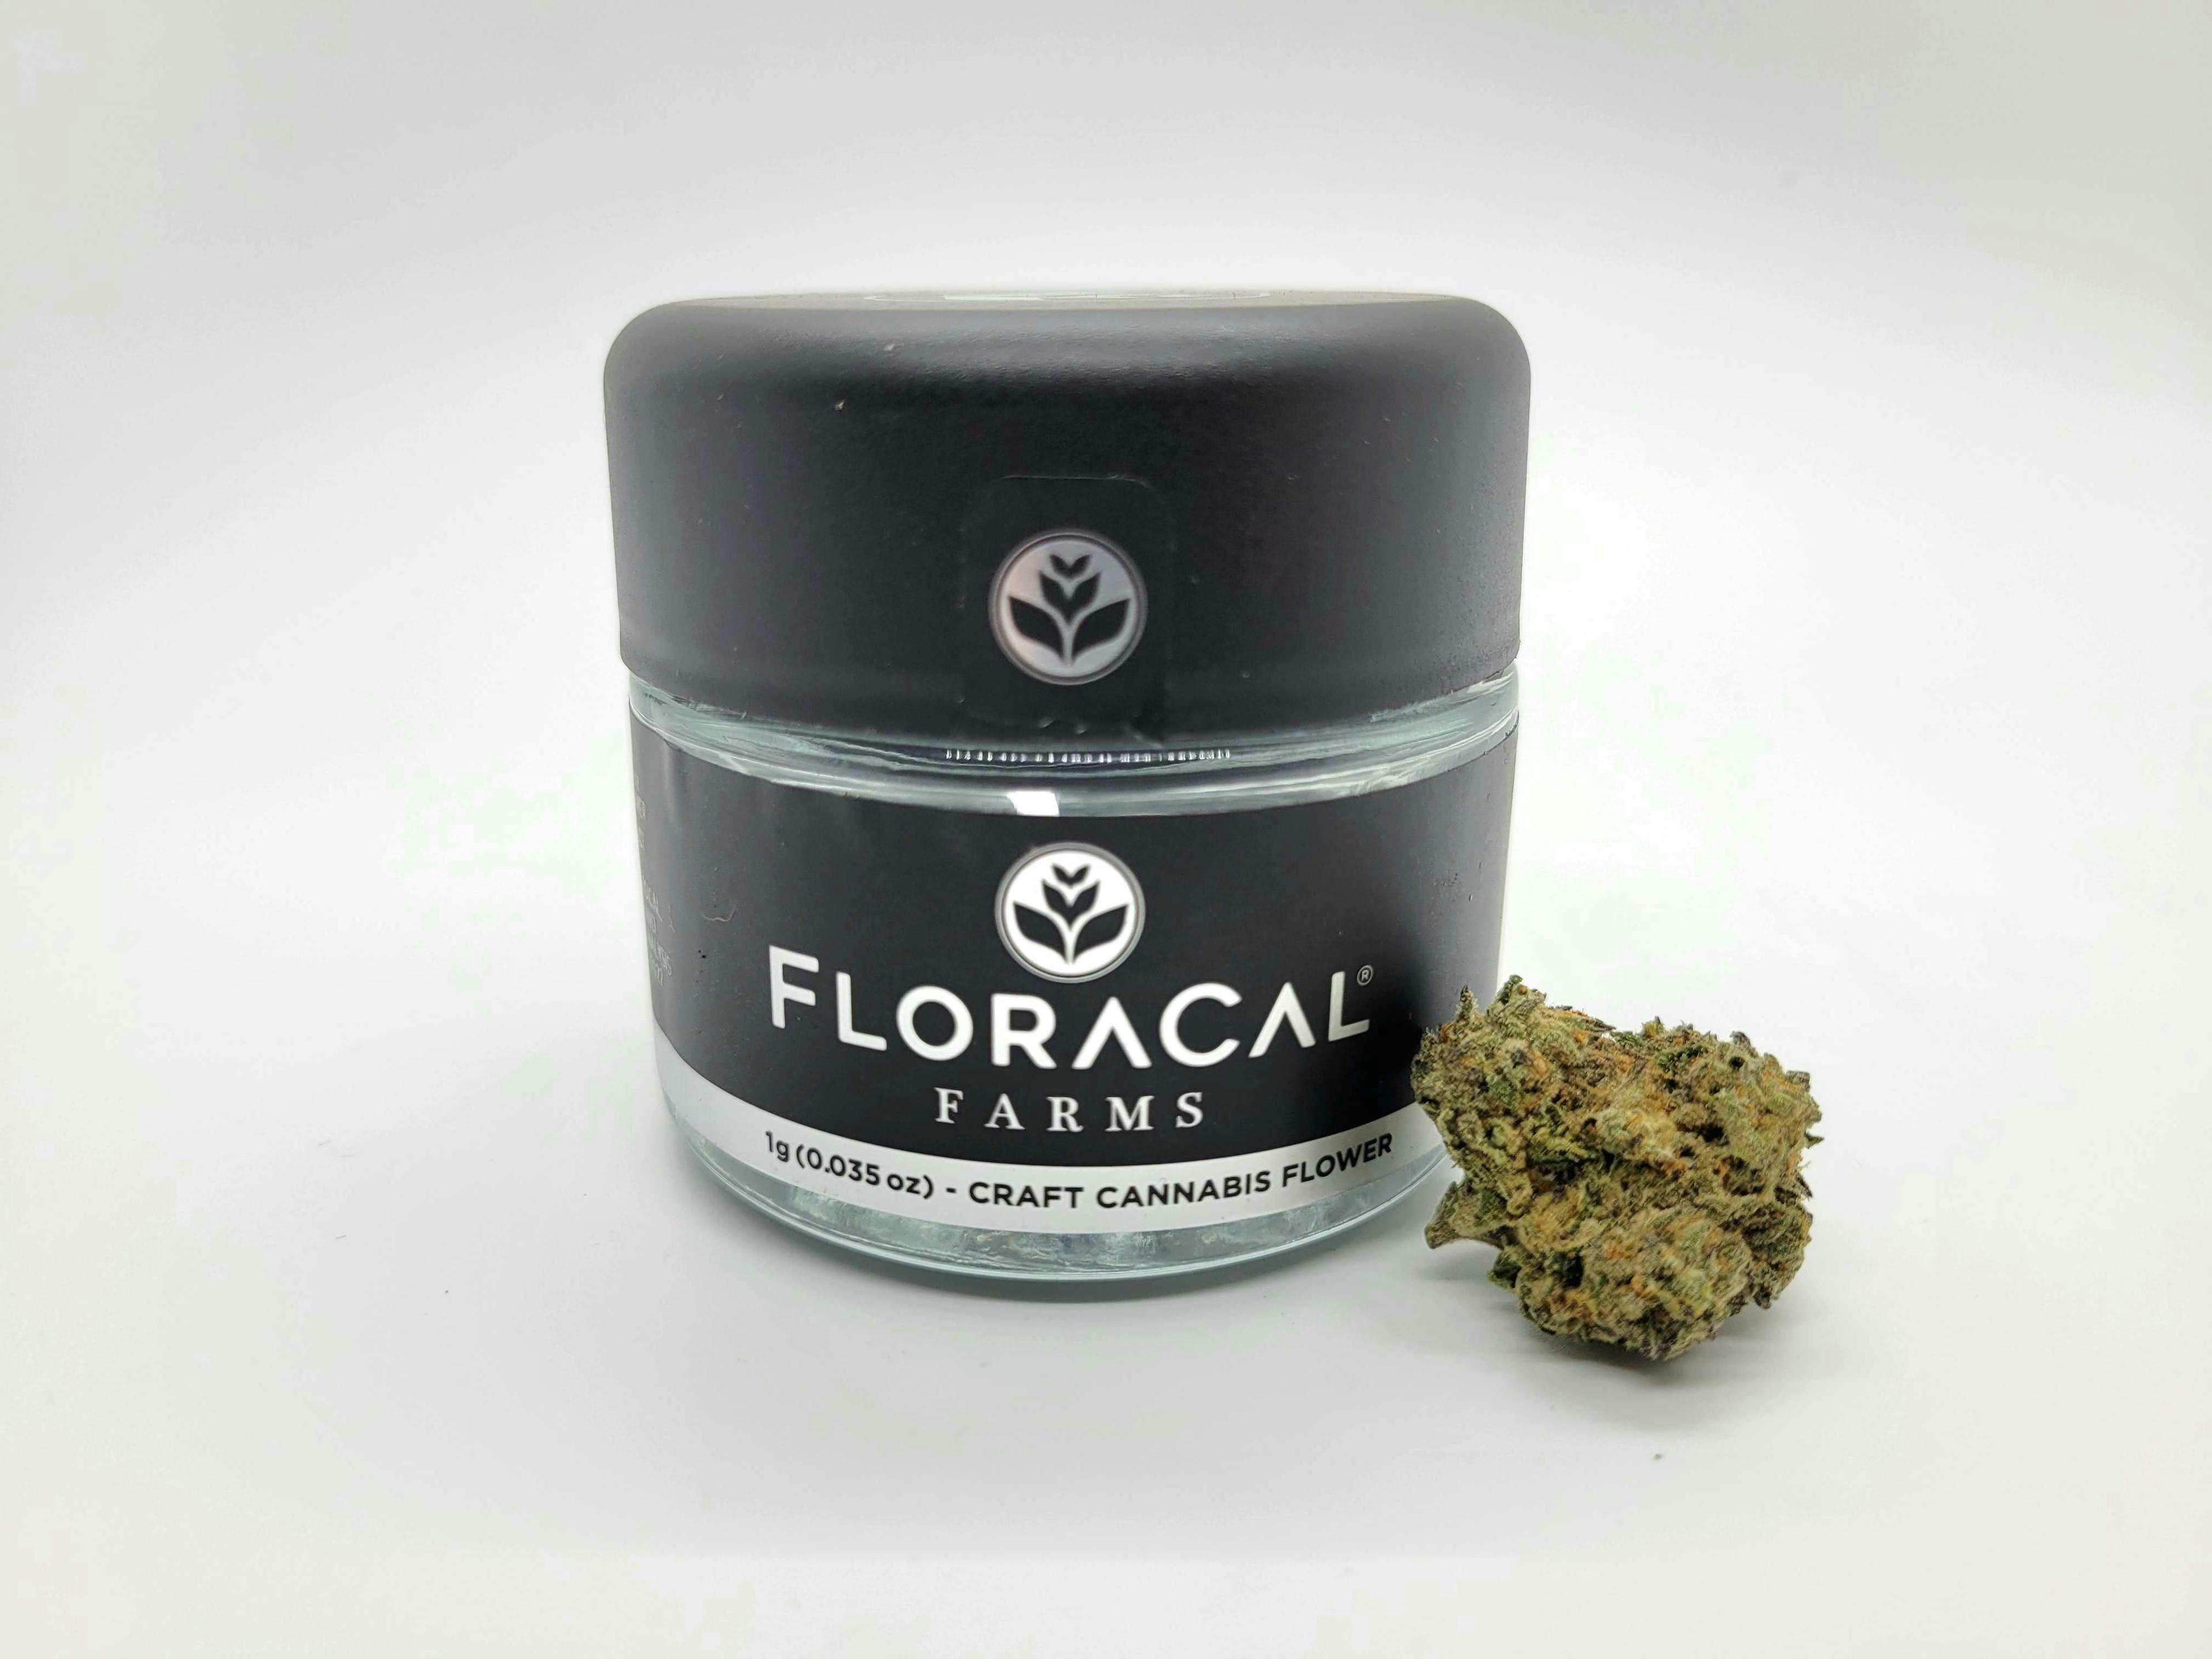 Blulato by Floracal Farms